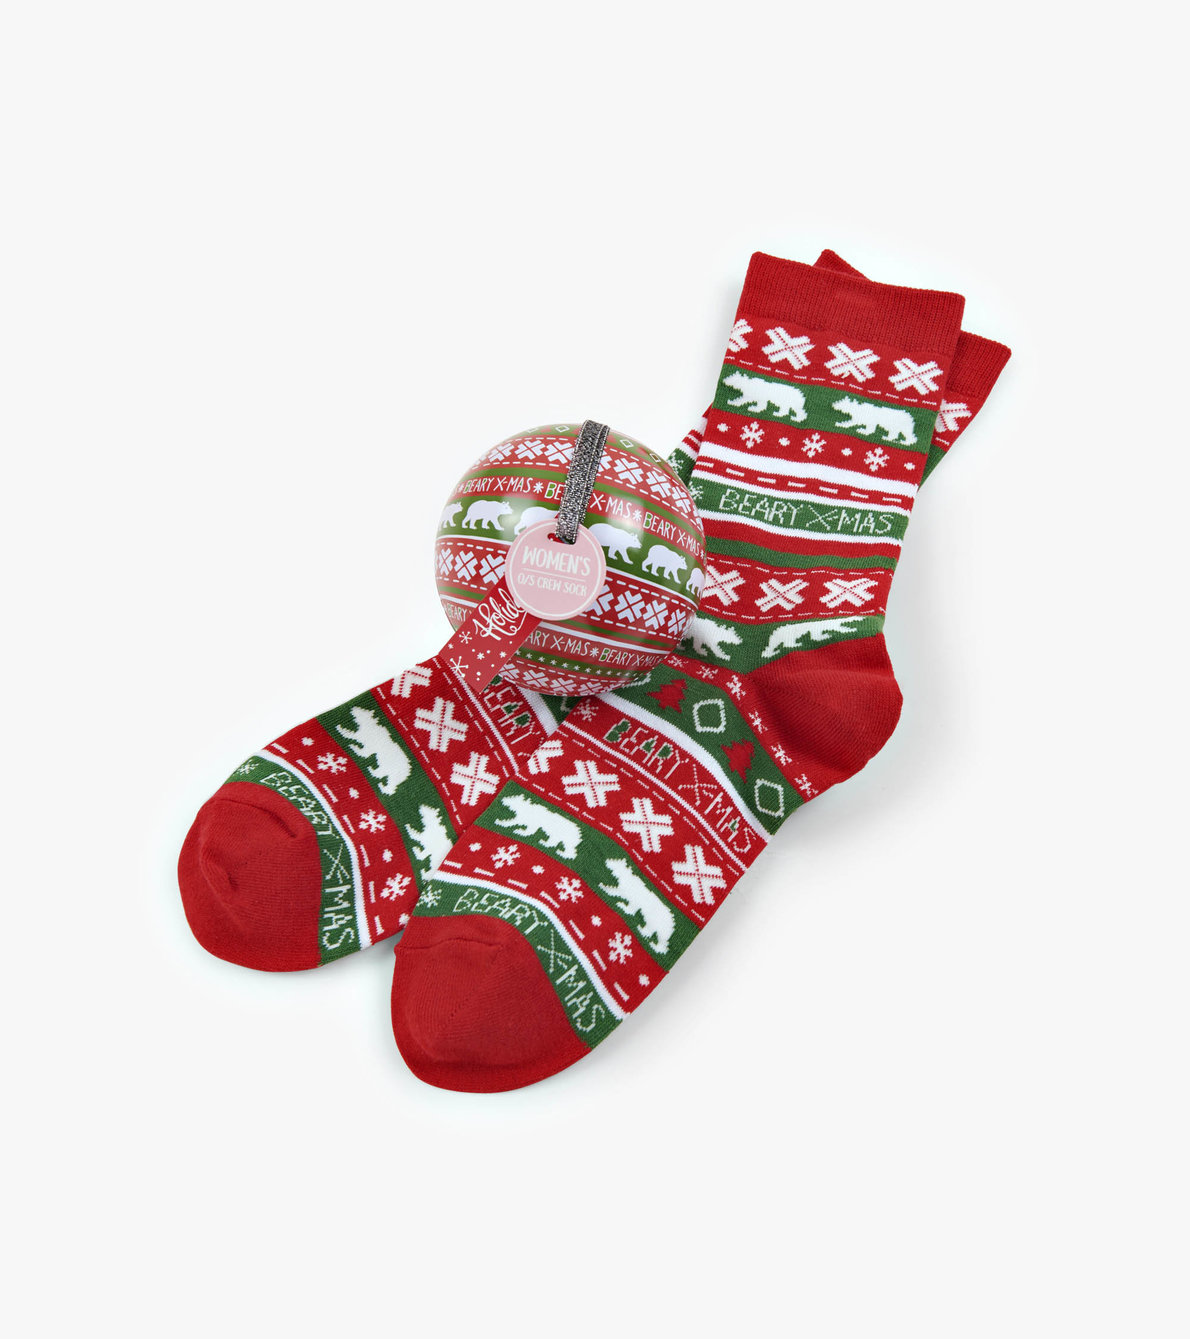 View larger image of Beary Xmas Women's Socks in Balls